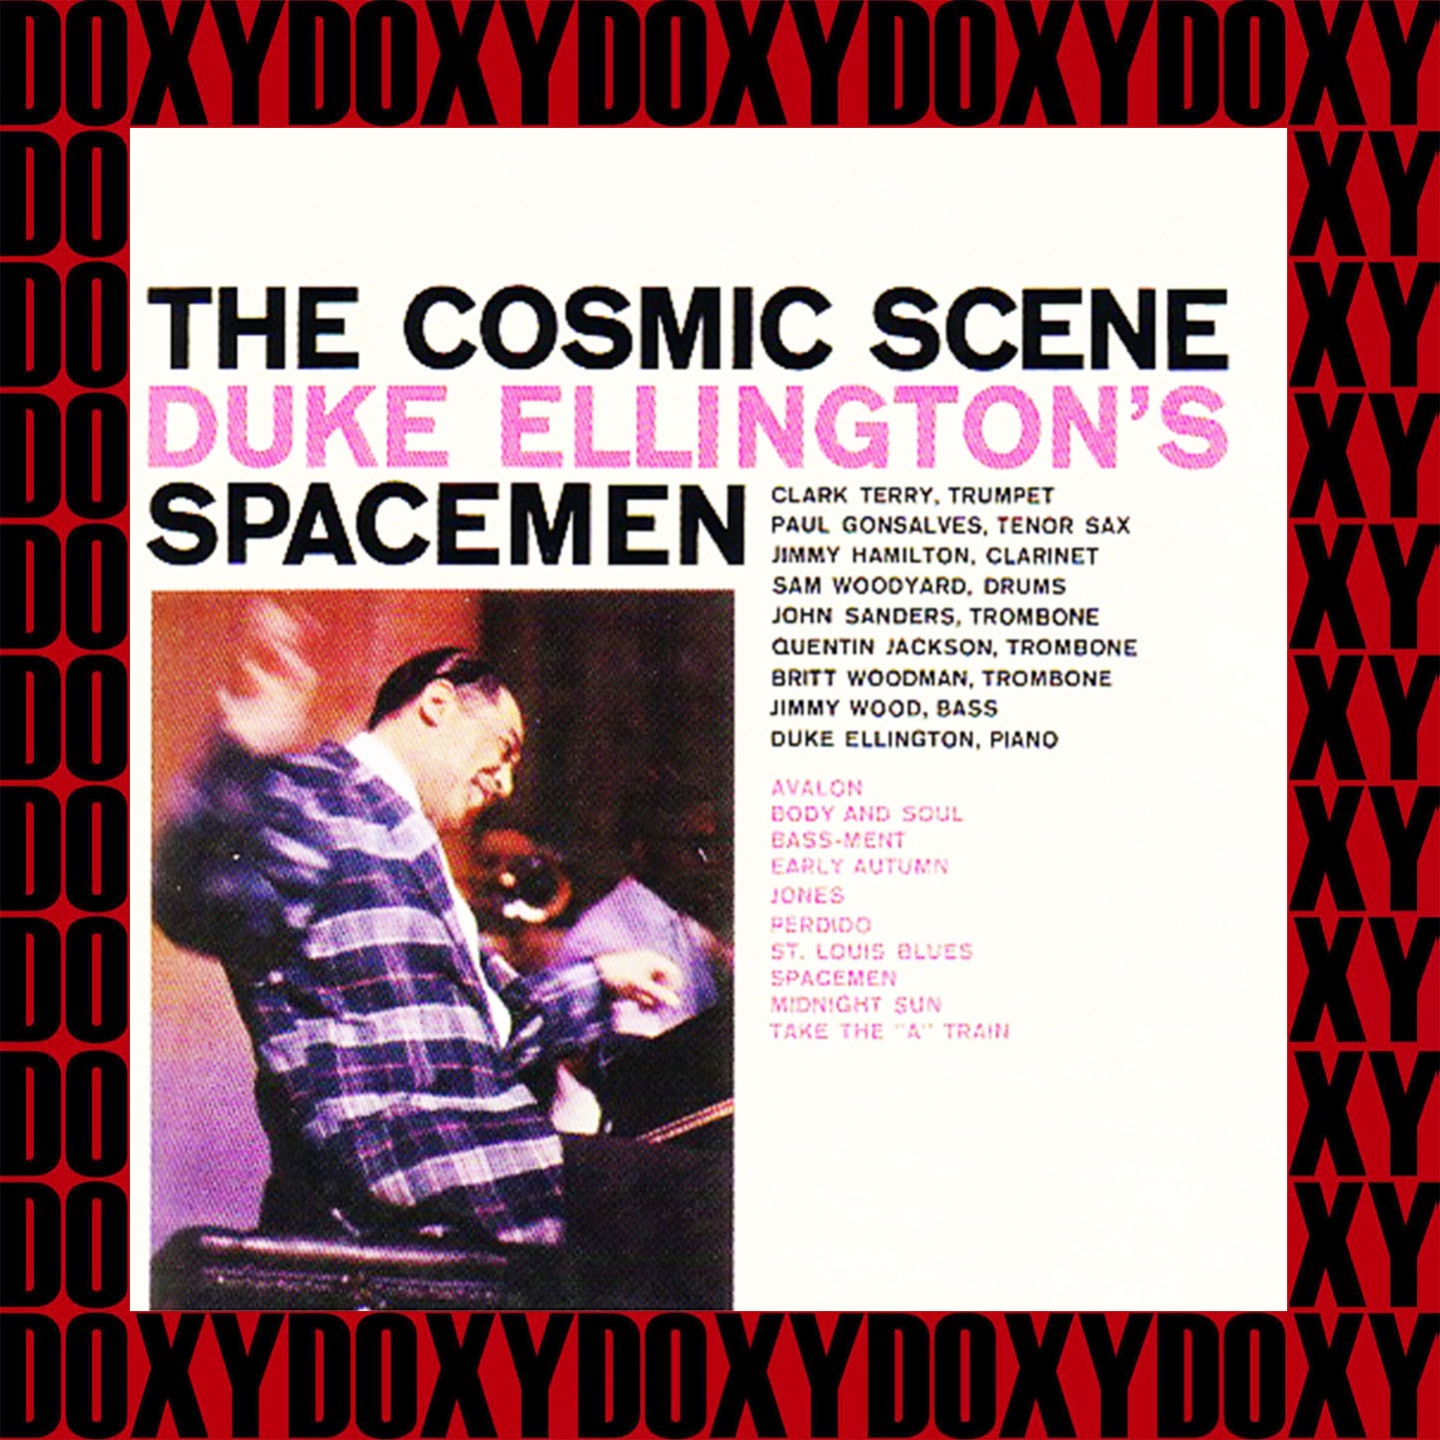 Duke Ellington's Spacemen: The Cosmic Scene (Expanded, Remastered Version) (Doxy Collection)